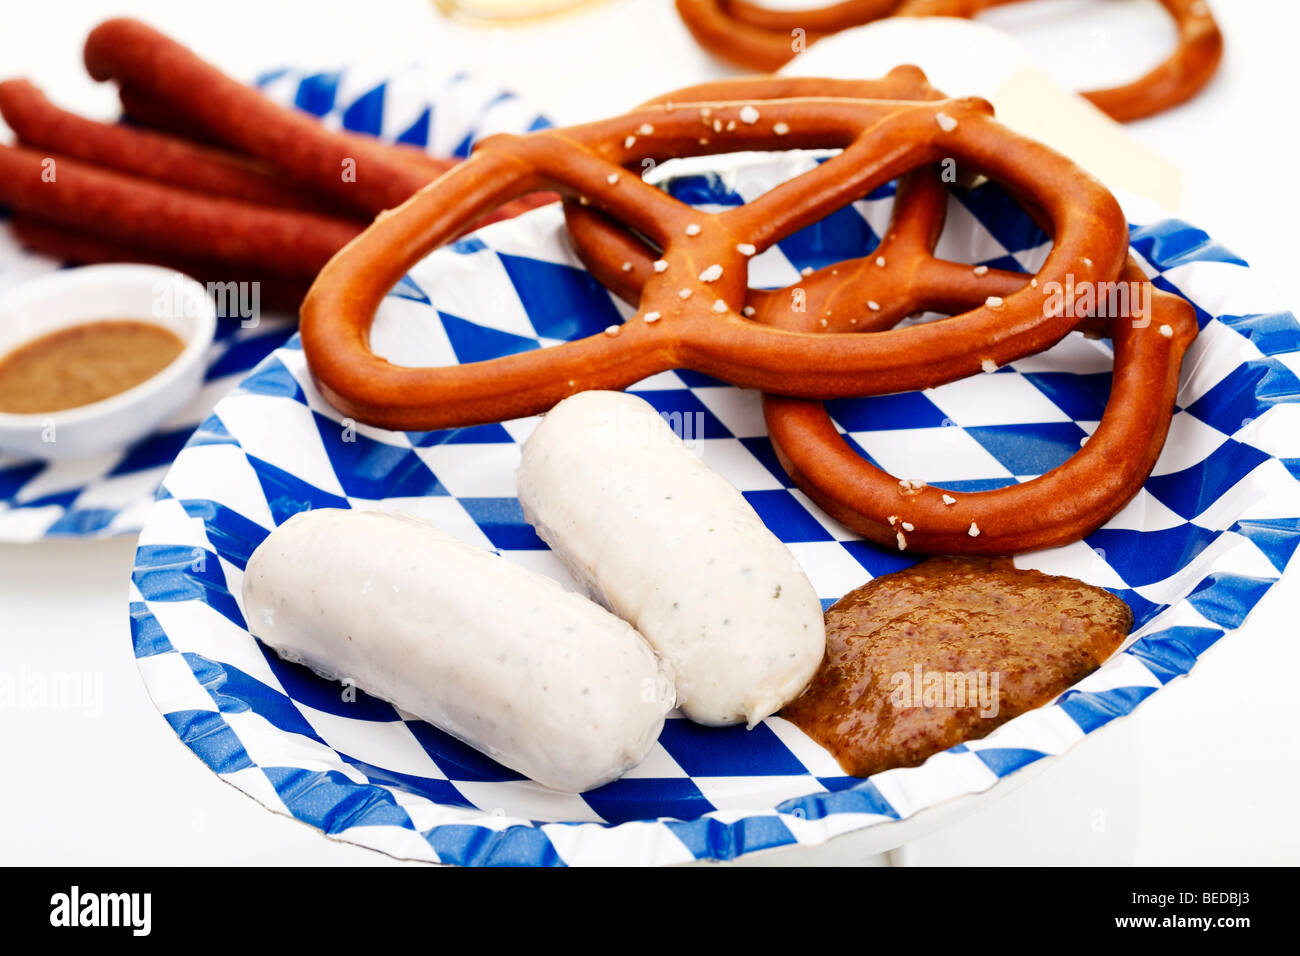 Veal sausages with sweet mustard, salted pretzels, ham Mettwurst sausages and beer Stock Photo